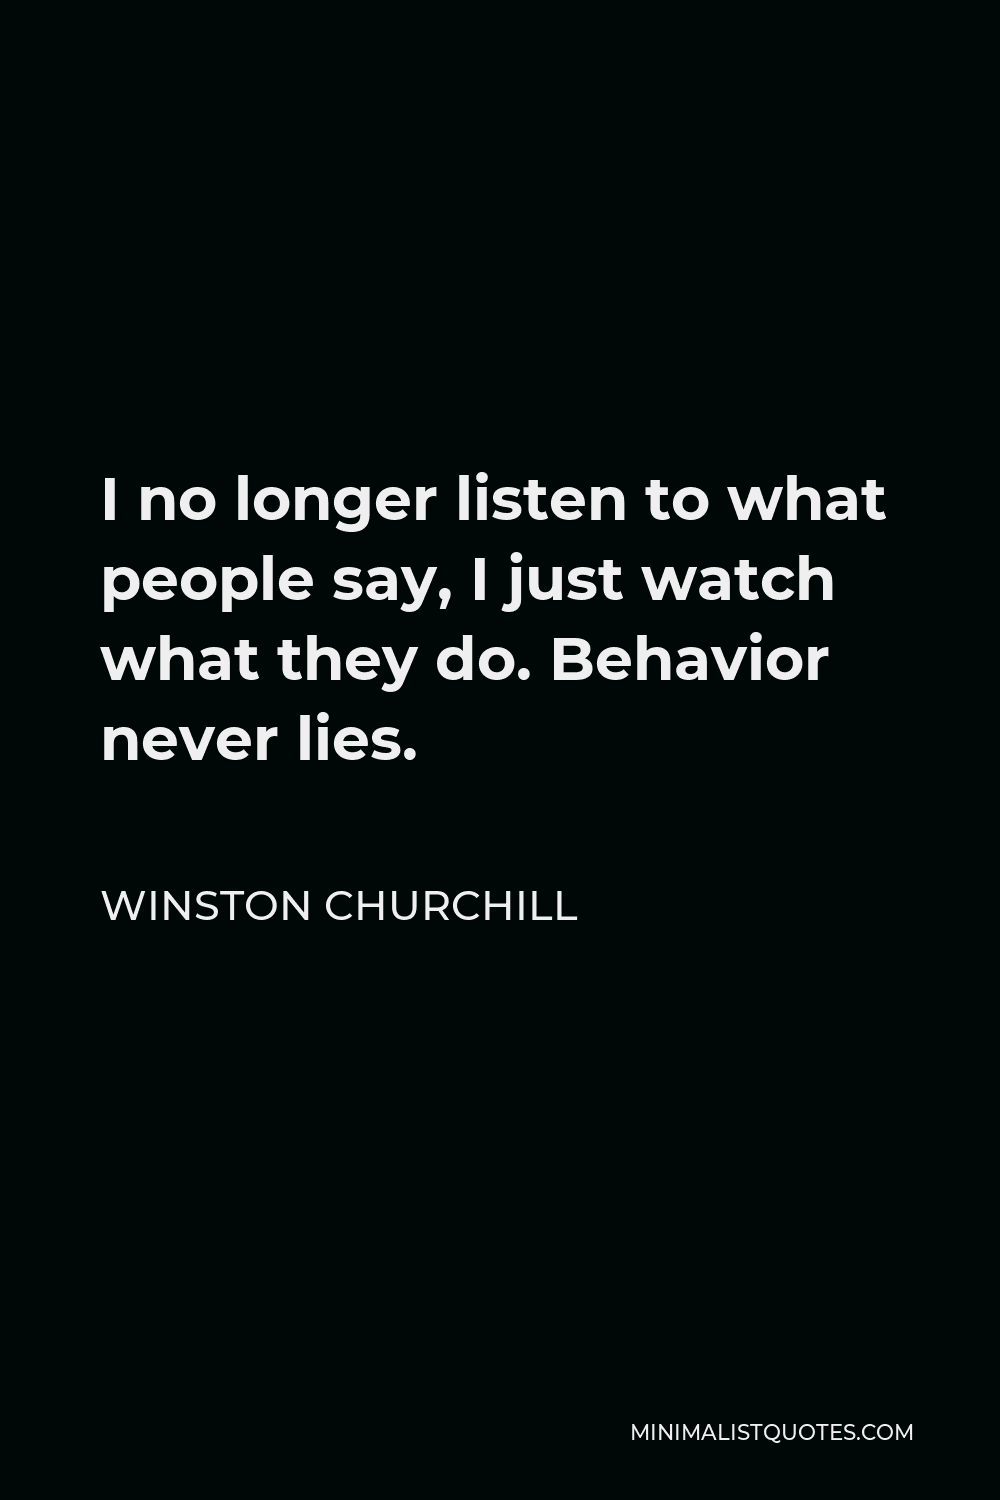 WINSTON CHURCHILL FAMOUS QUOTE PHOTO PRINT I NO LONGER LISTEN TO WHAT PEOPLE SAY 